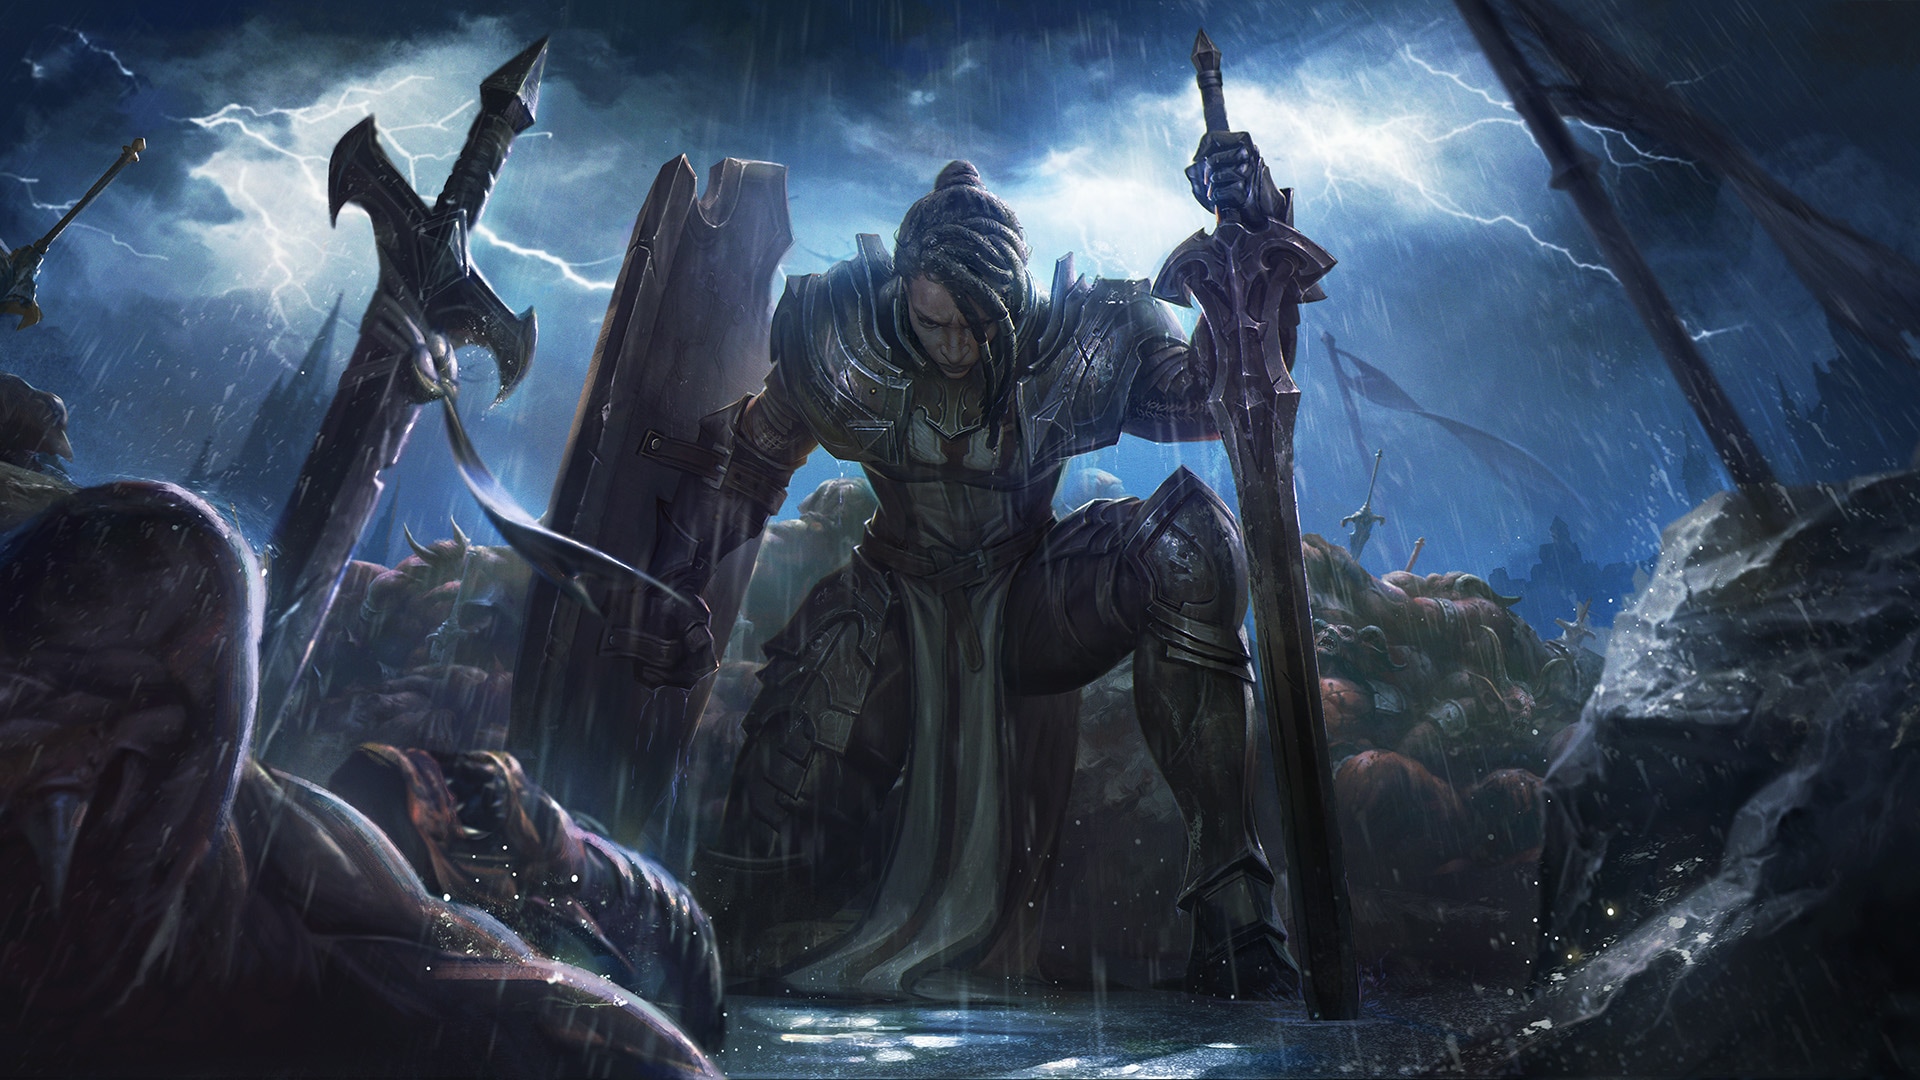 Diablo Immortal Season 3 Aspect of Justice brings the Battle Pass, in-game  events and more - MEmu Blog